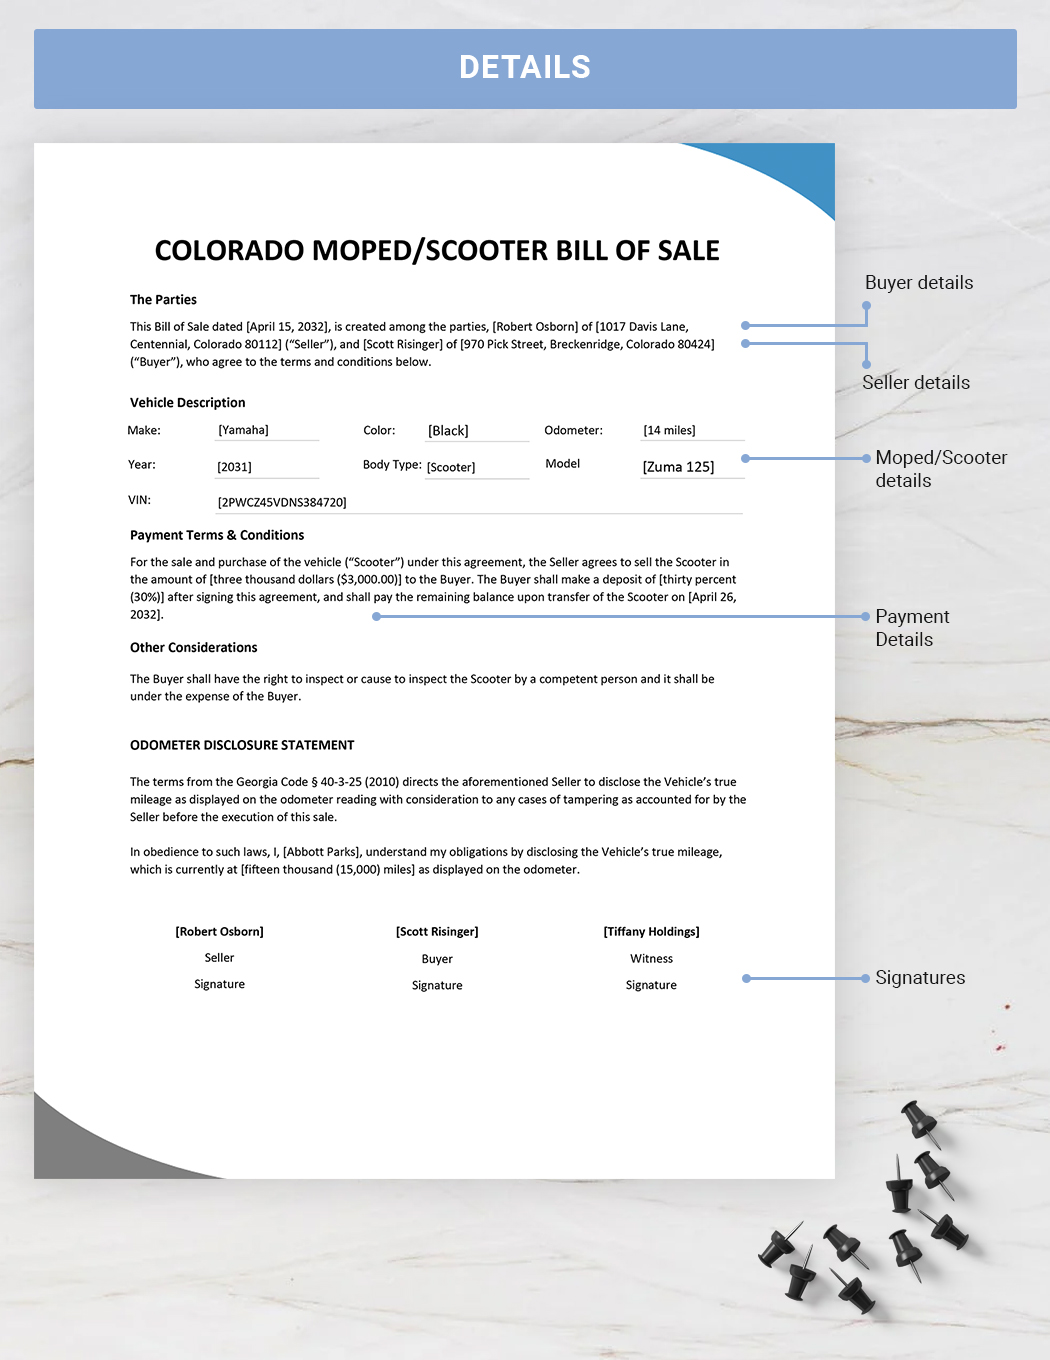 Colorado Moped / Scooter Bill of Sale Template